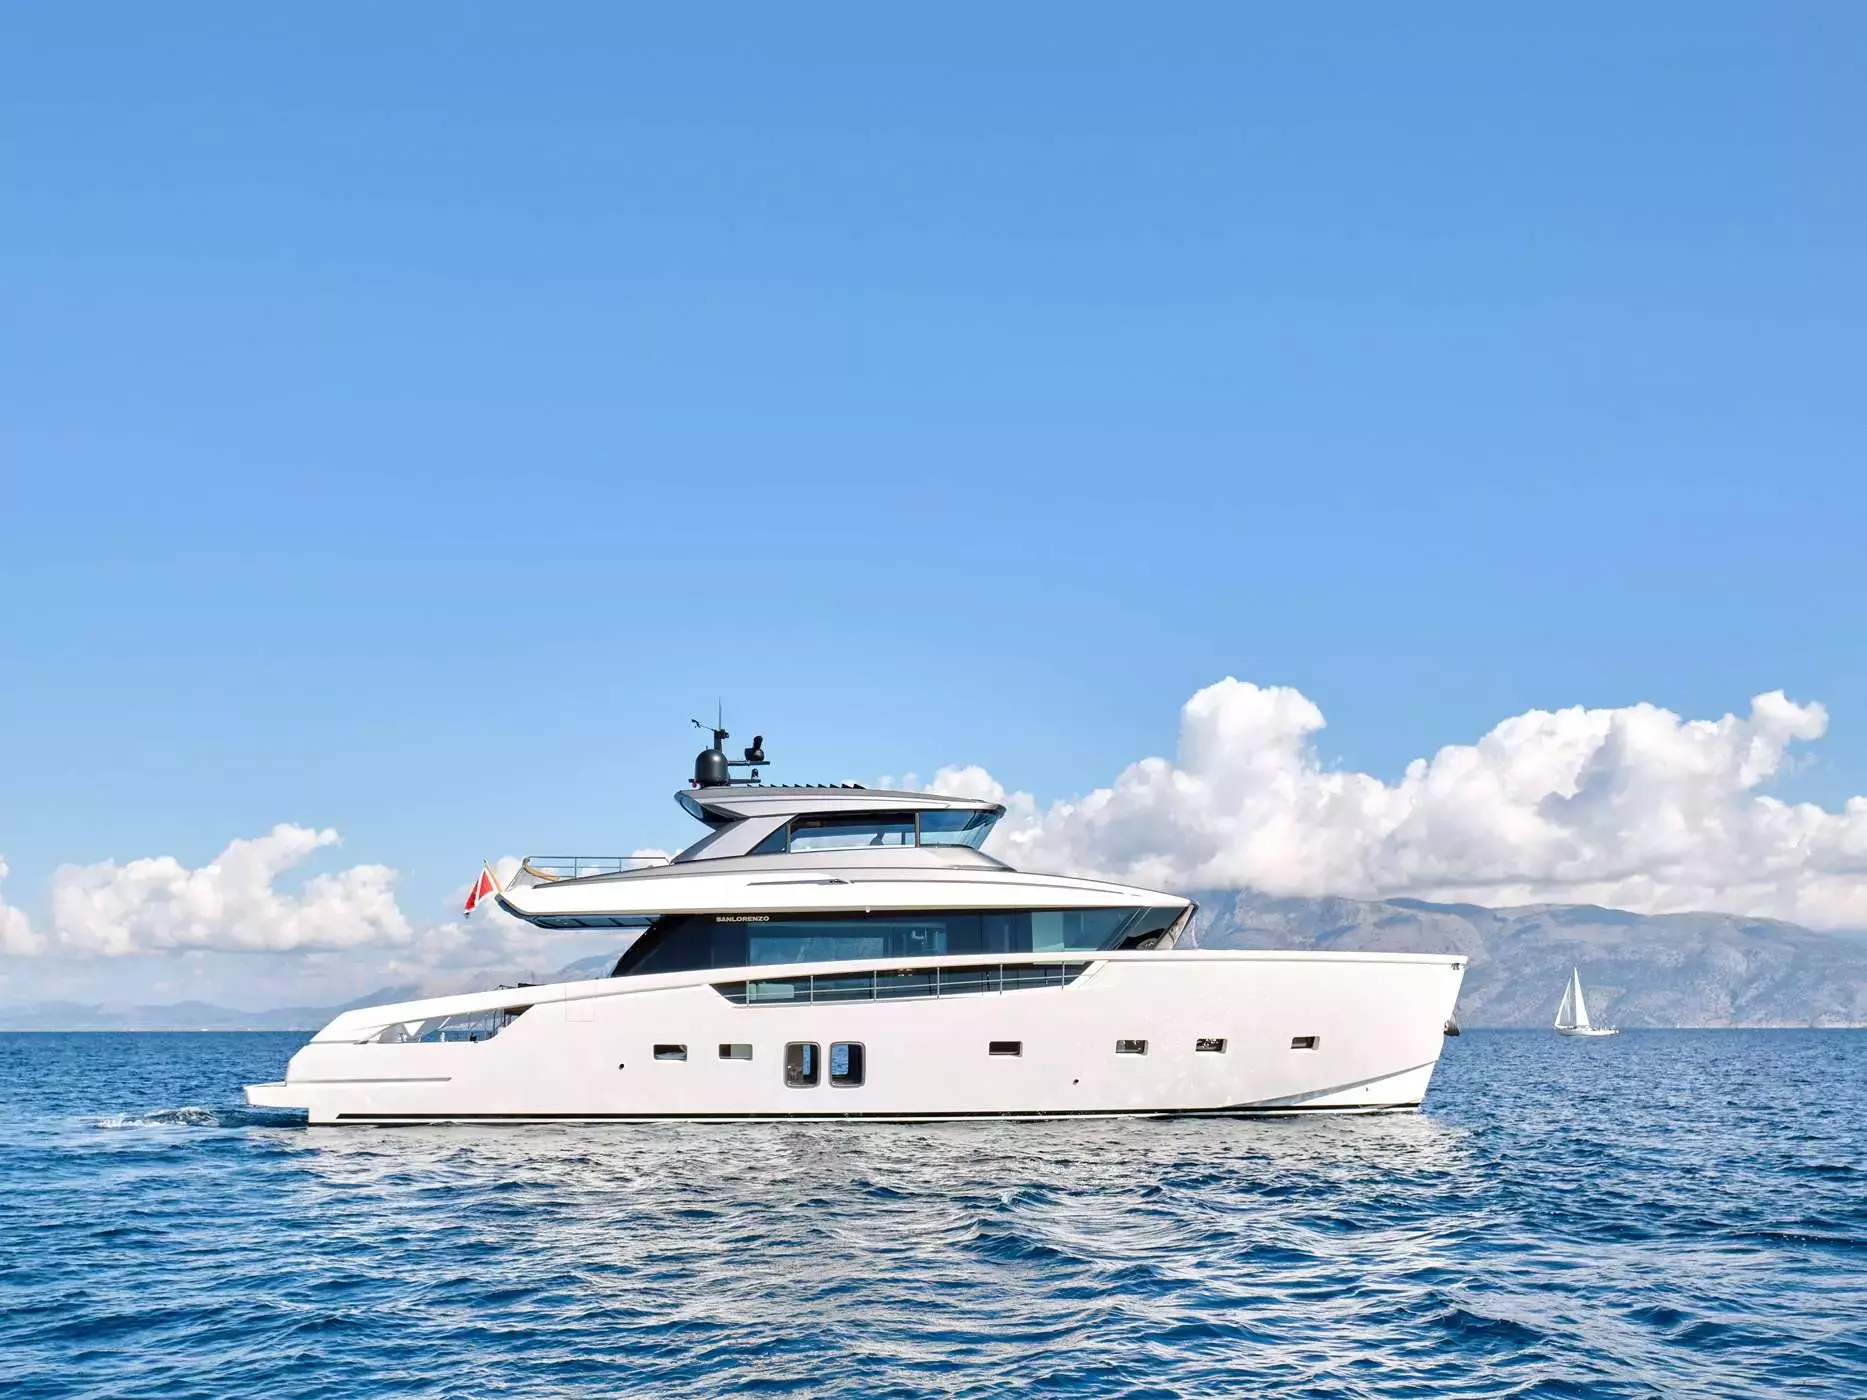 Nirvana by Sanlorenzo - Special Offer for a private Motor Yacht Charter in Lavrion with a crew